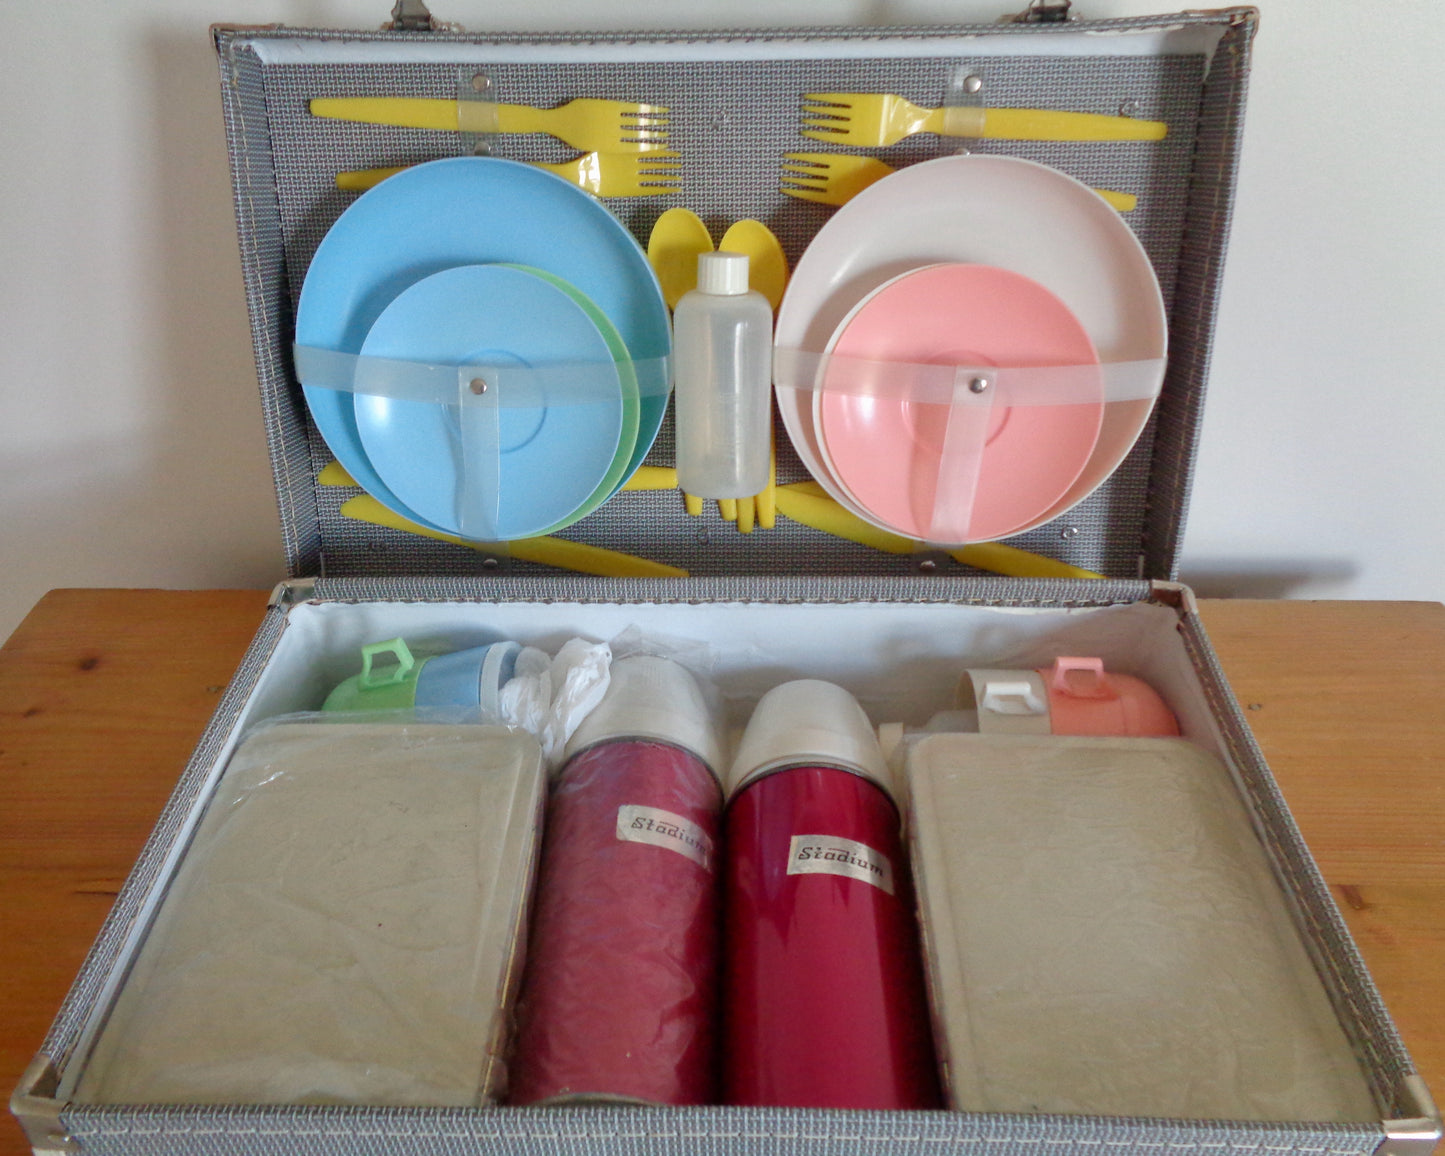 1950s Stadium Country Life Picnic Set Travel Case With 4 Place Settings In Plastic